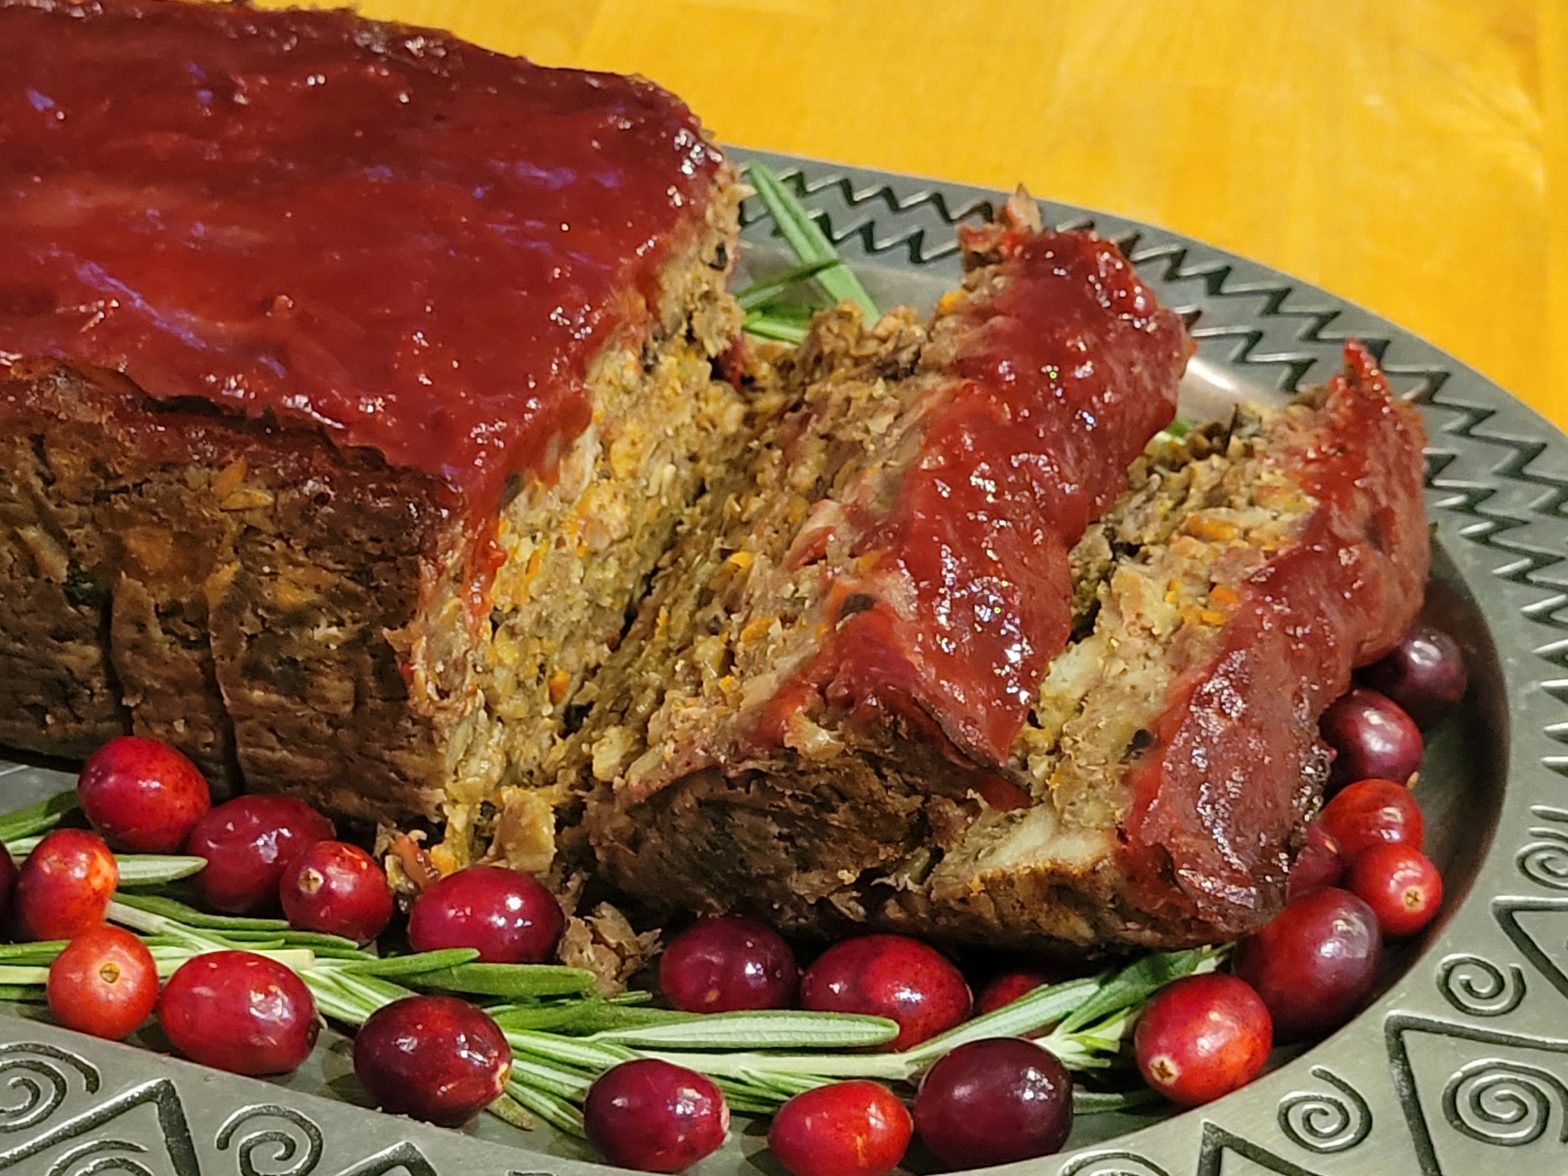 A close up of a plate with meat loaf